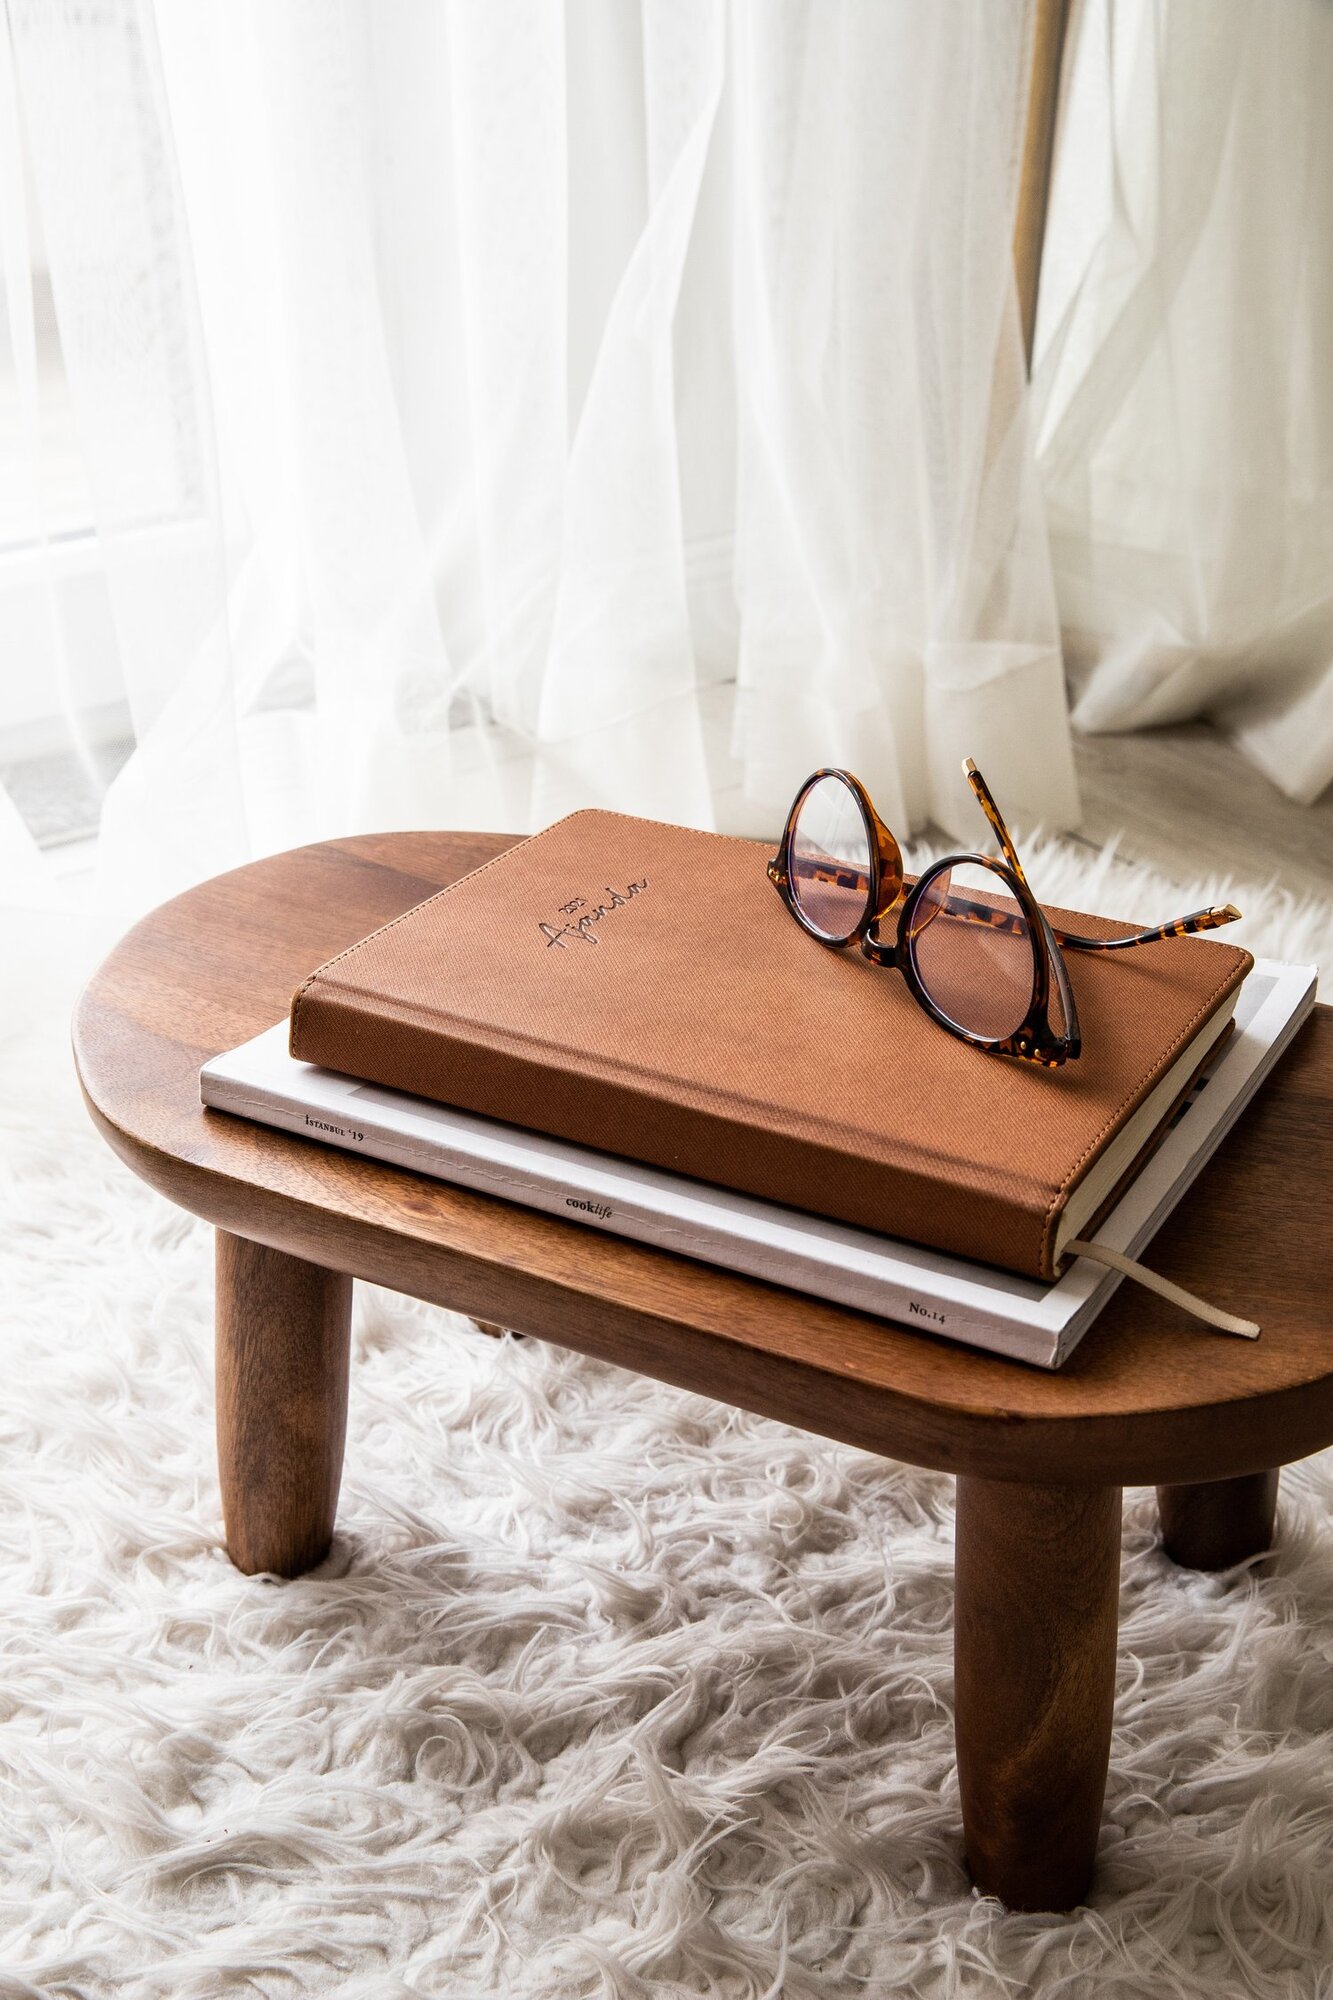 Rustic coffee table with book and glasses